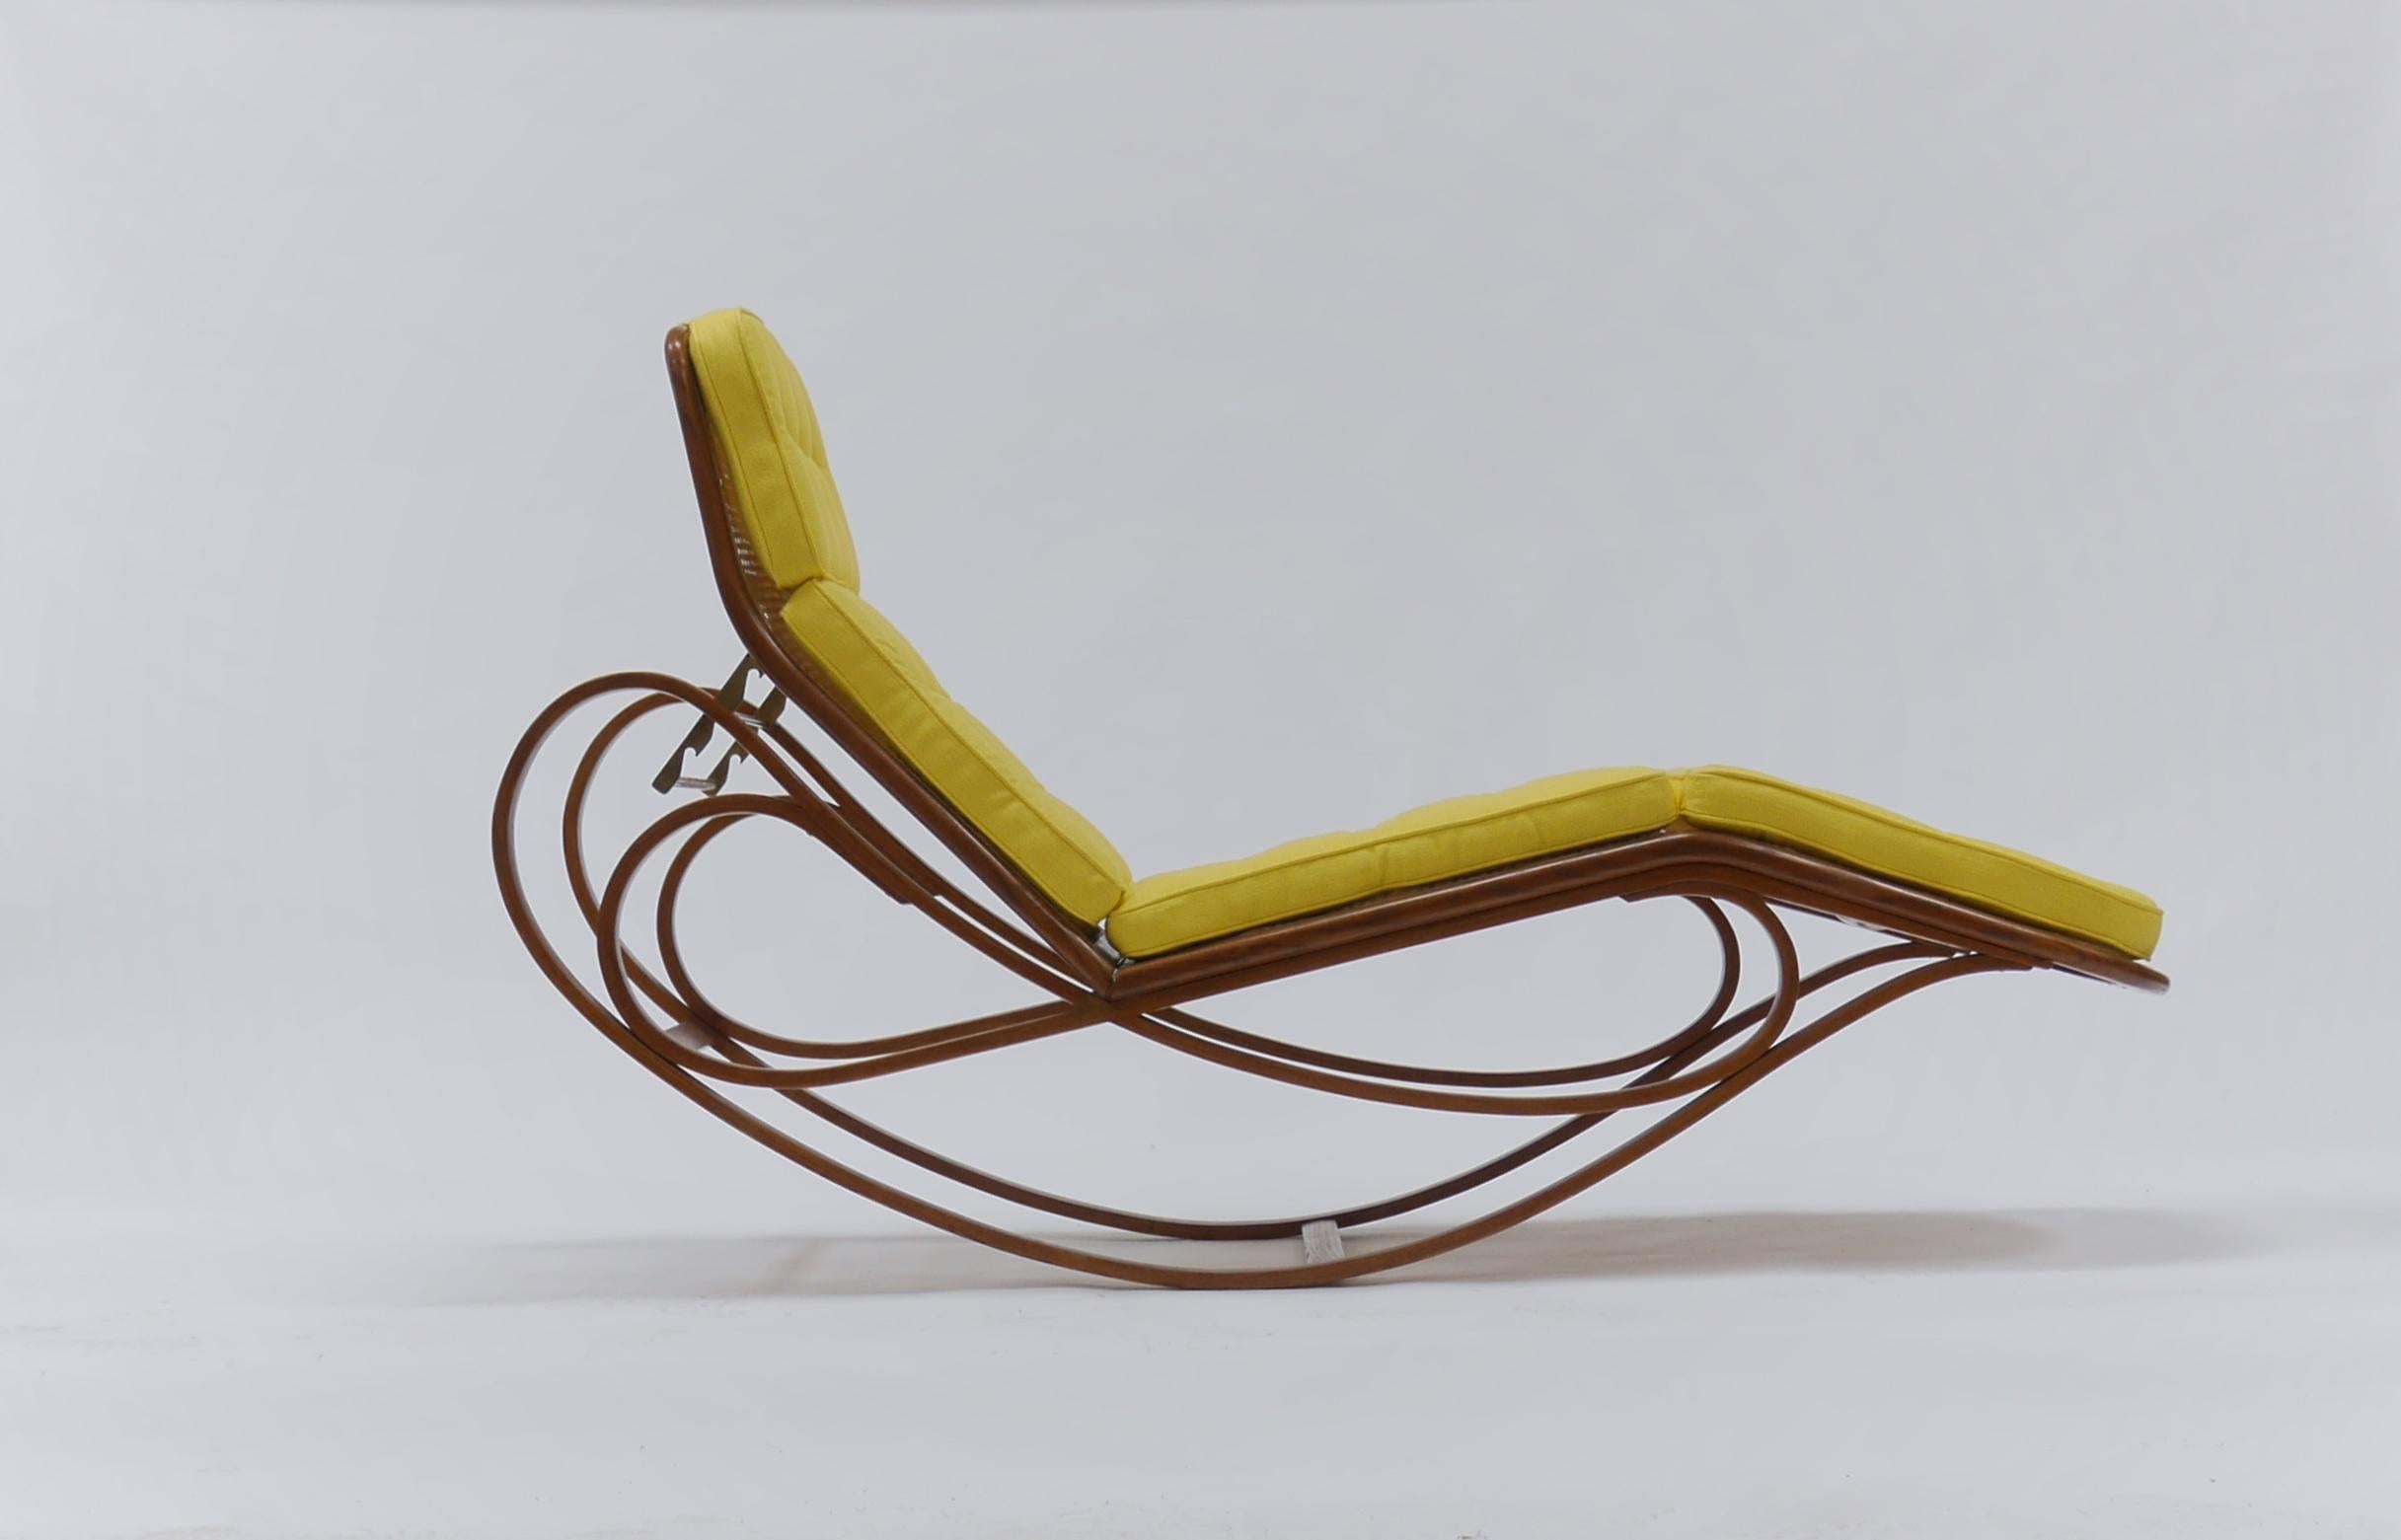 Chaise Lounge by Edward Wormley for Dunbar In Excellent Condition For Sale In Hadley, MA